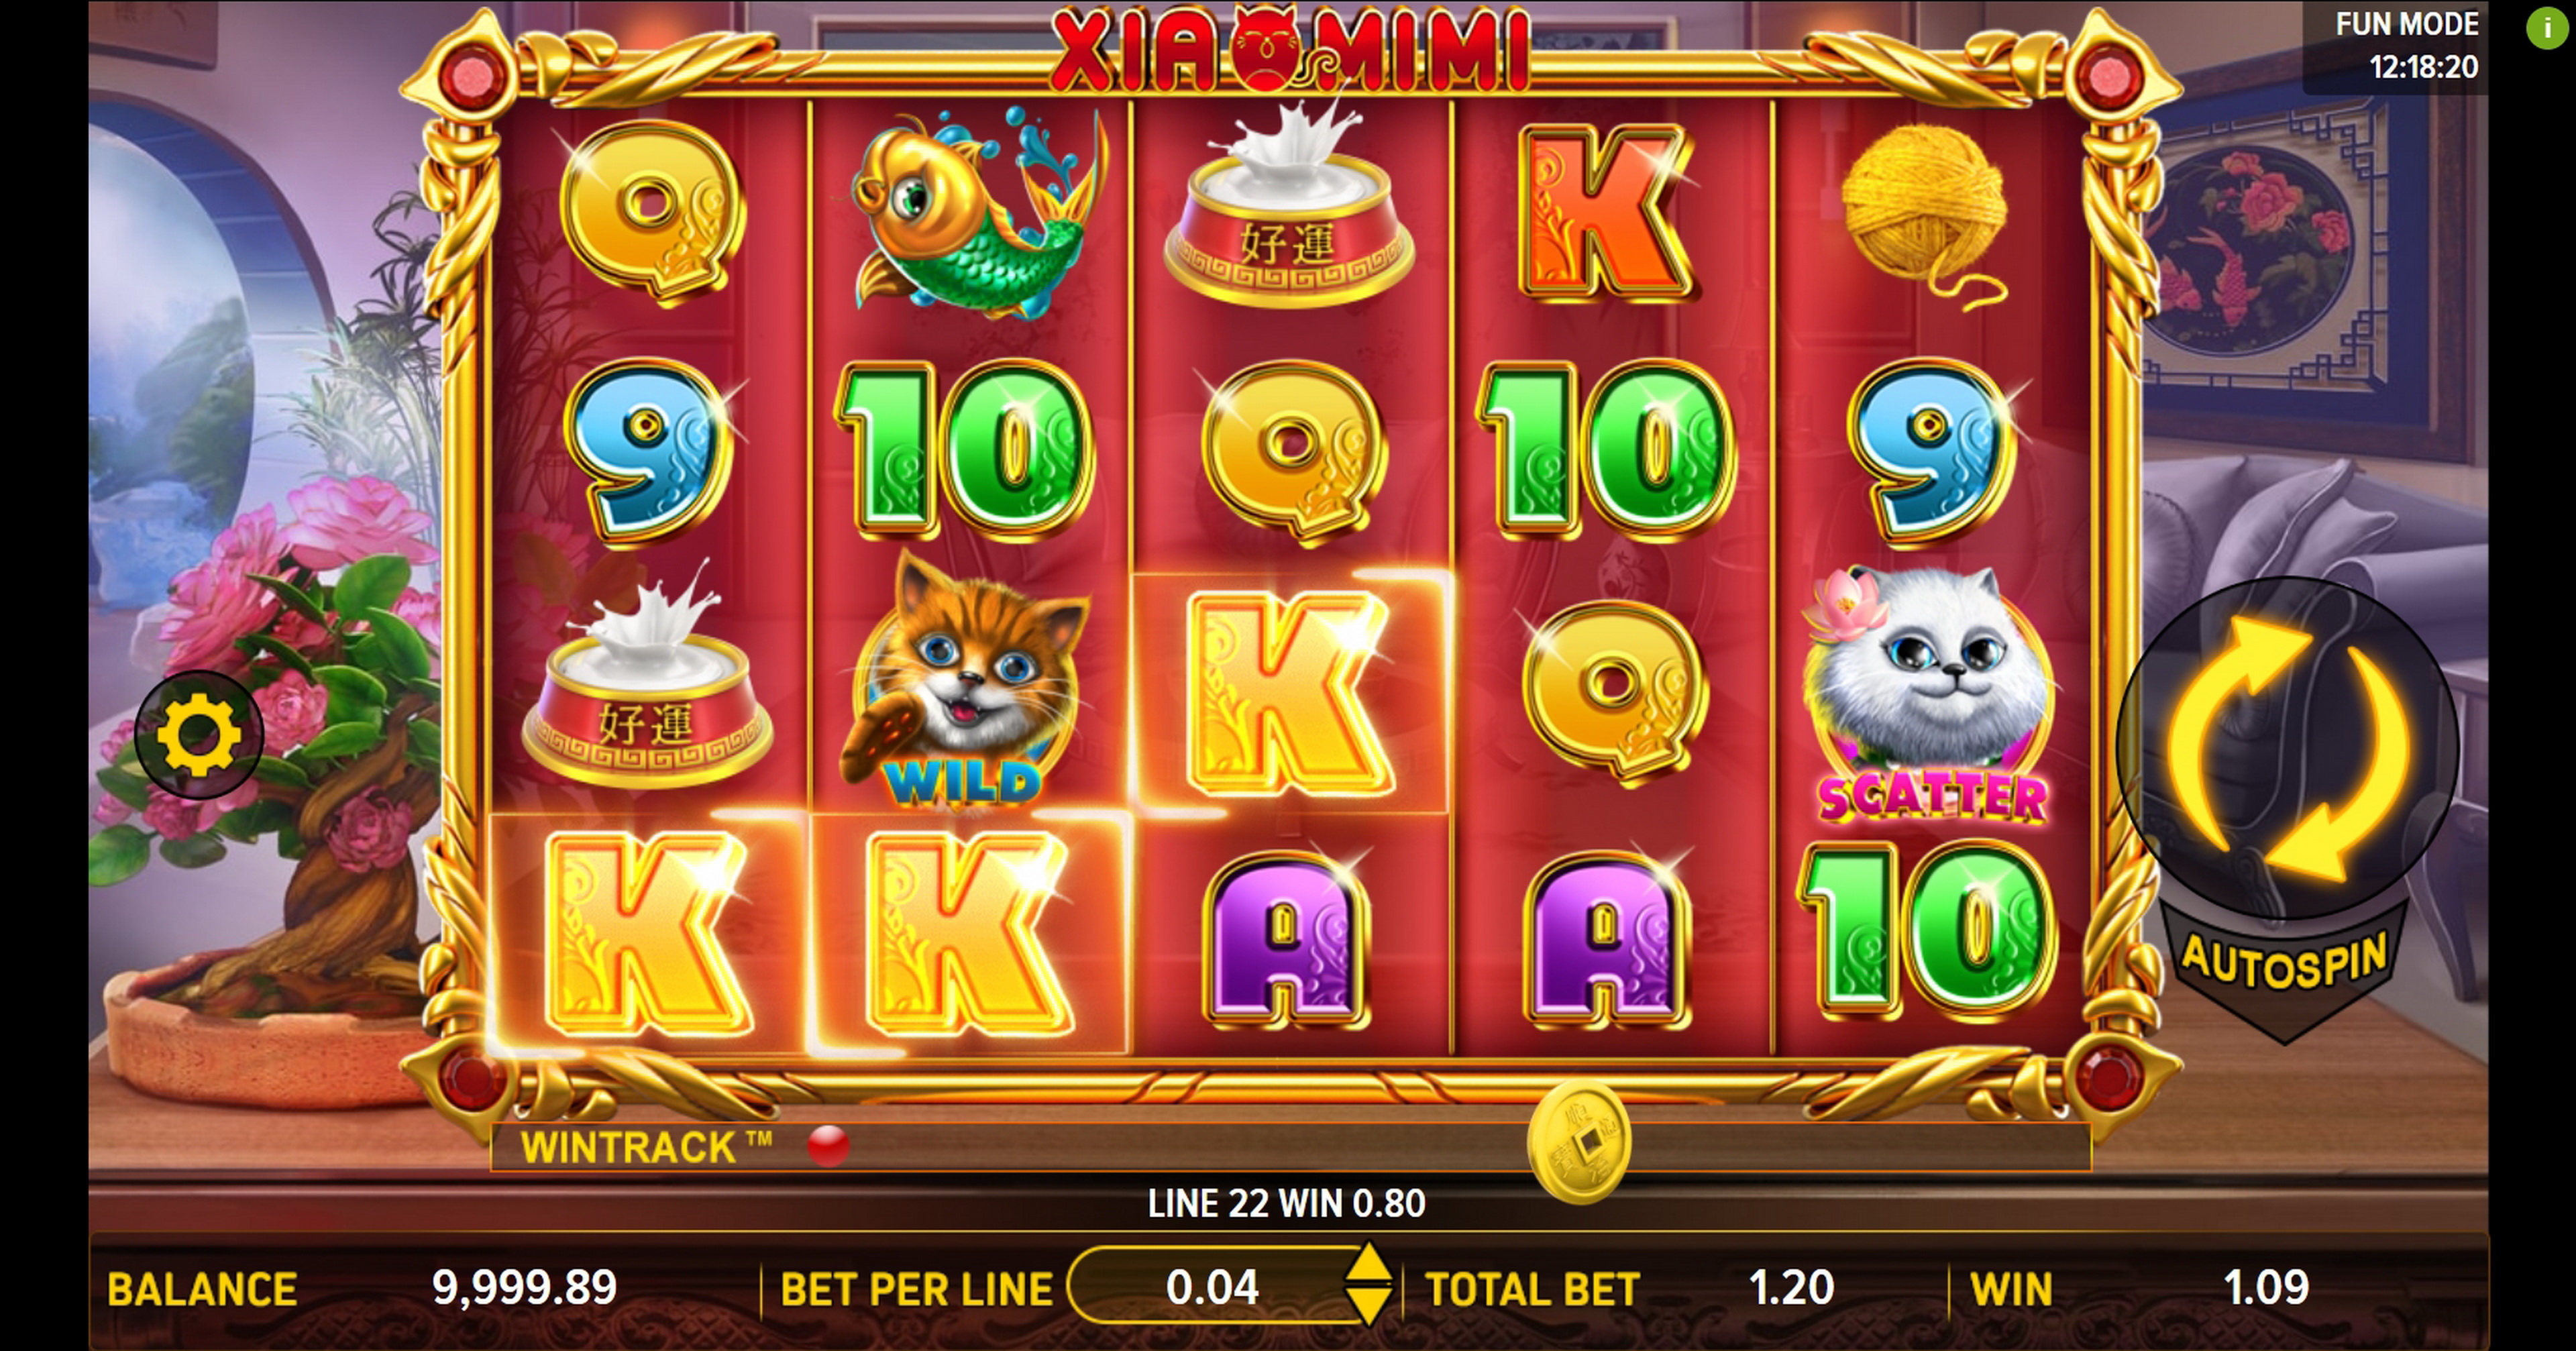 Win Money in Xiao Mi Mi Free Slot Game by Aspect Gaming